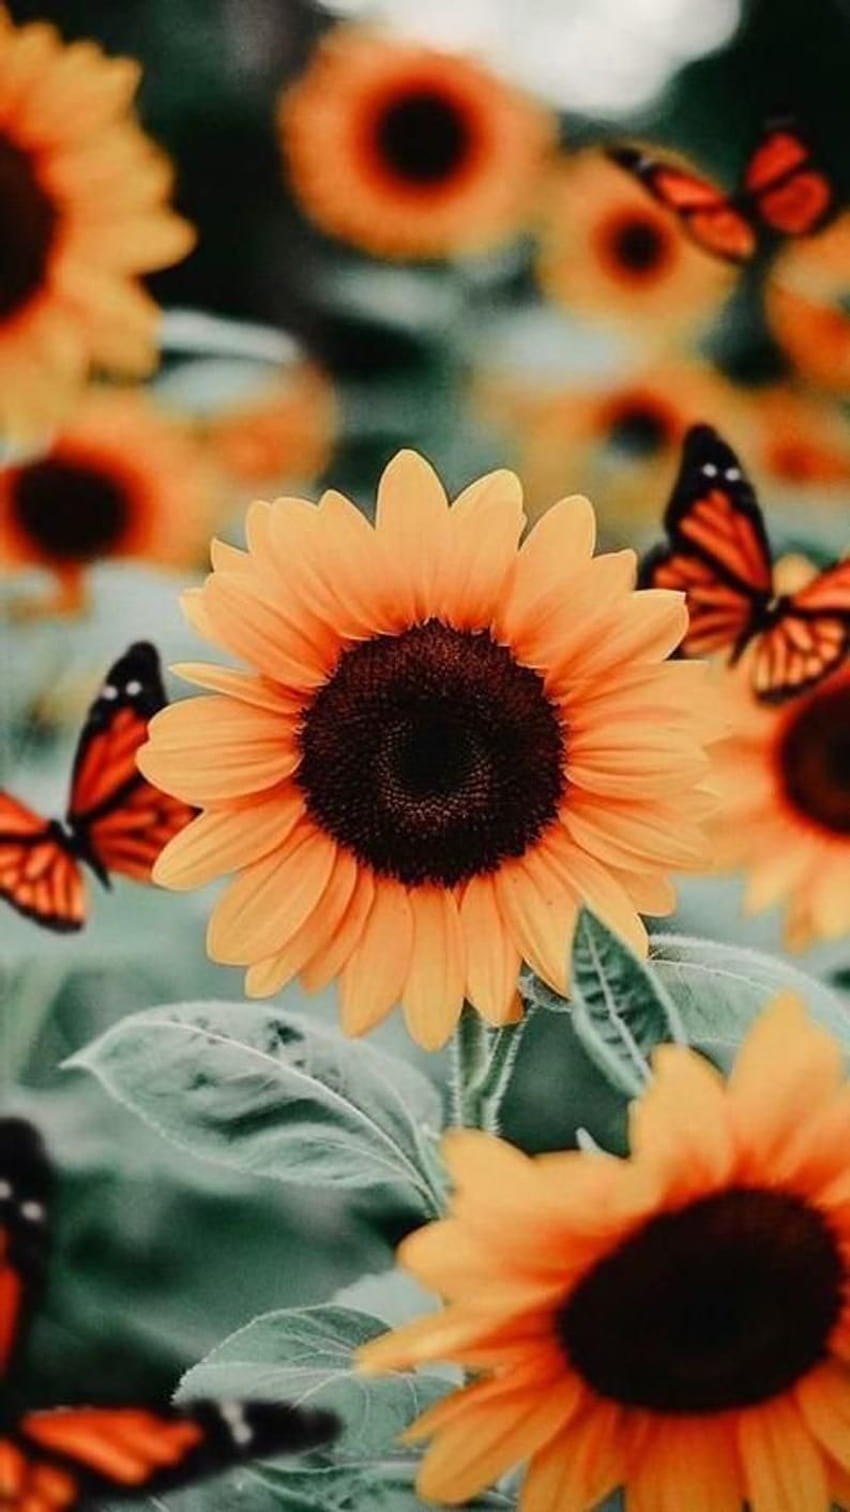 Sunflowers and butterflies wallpaper for your phone - Sunflower